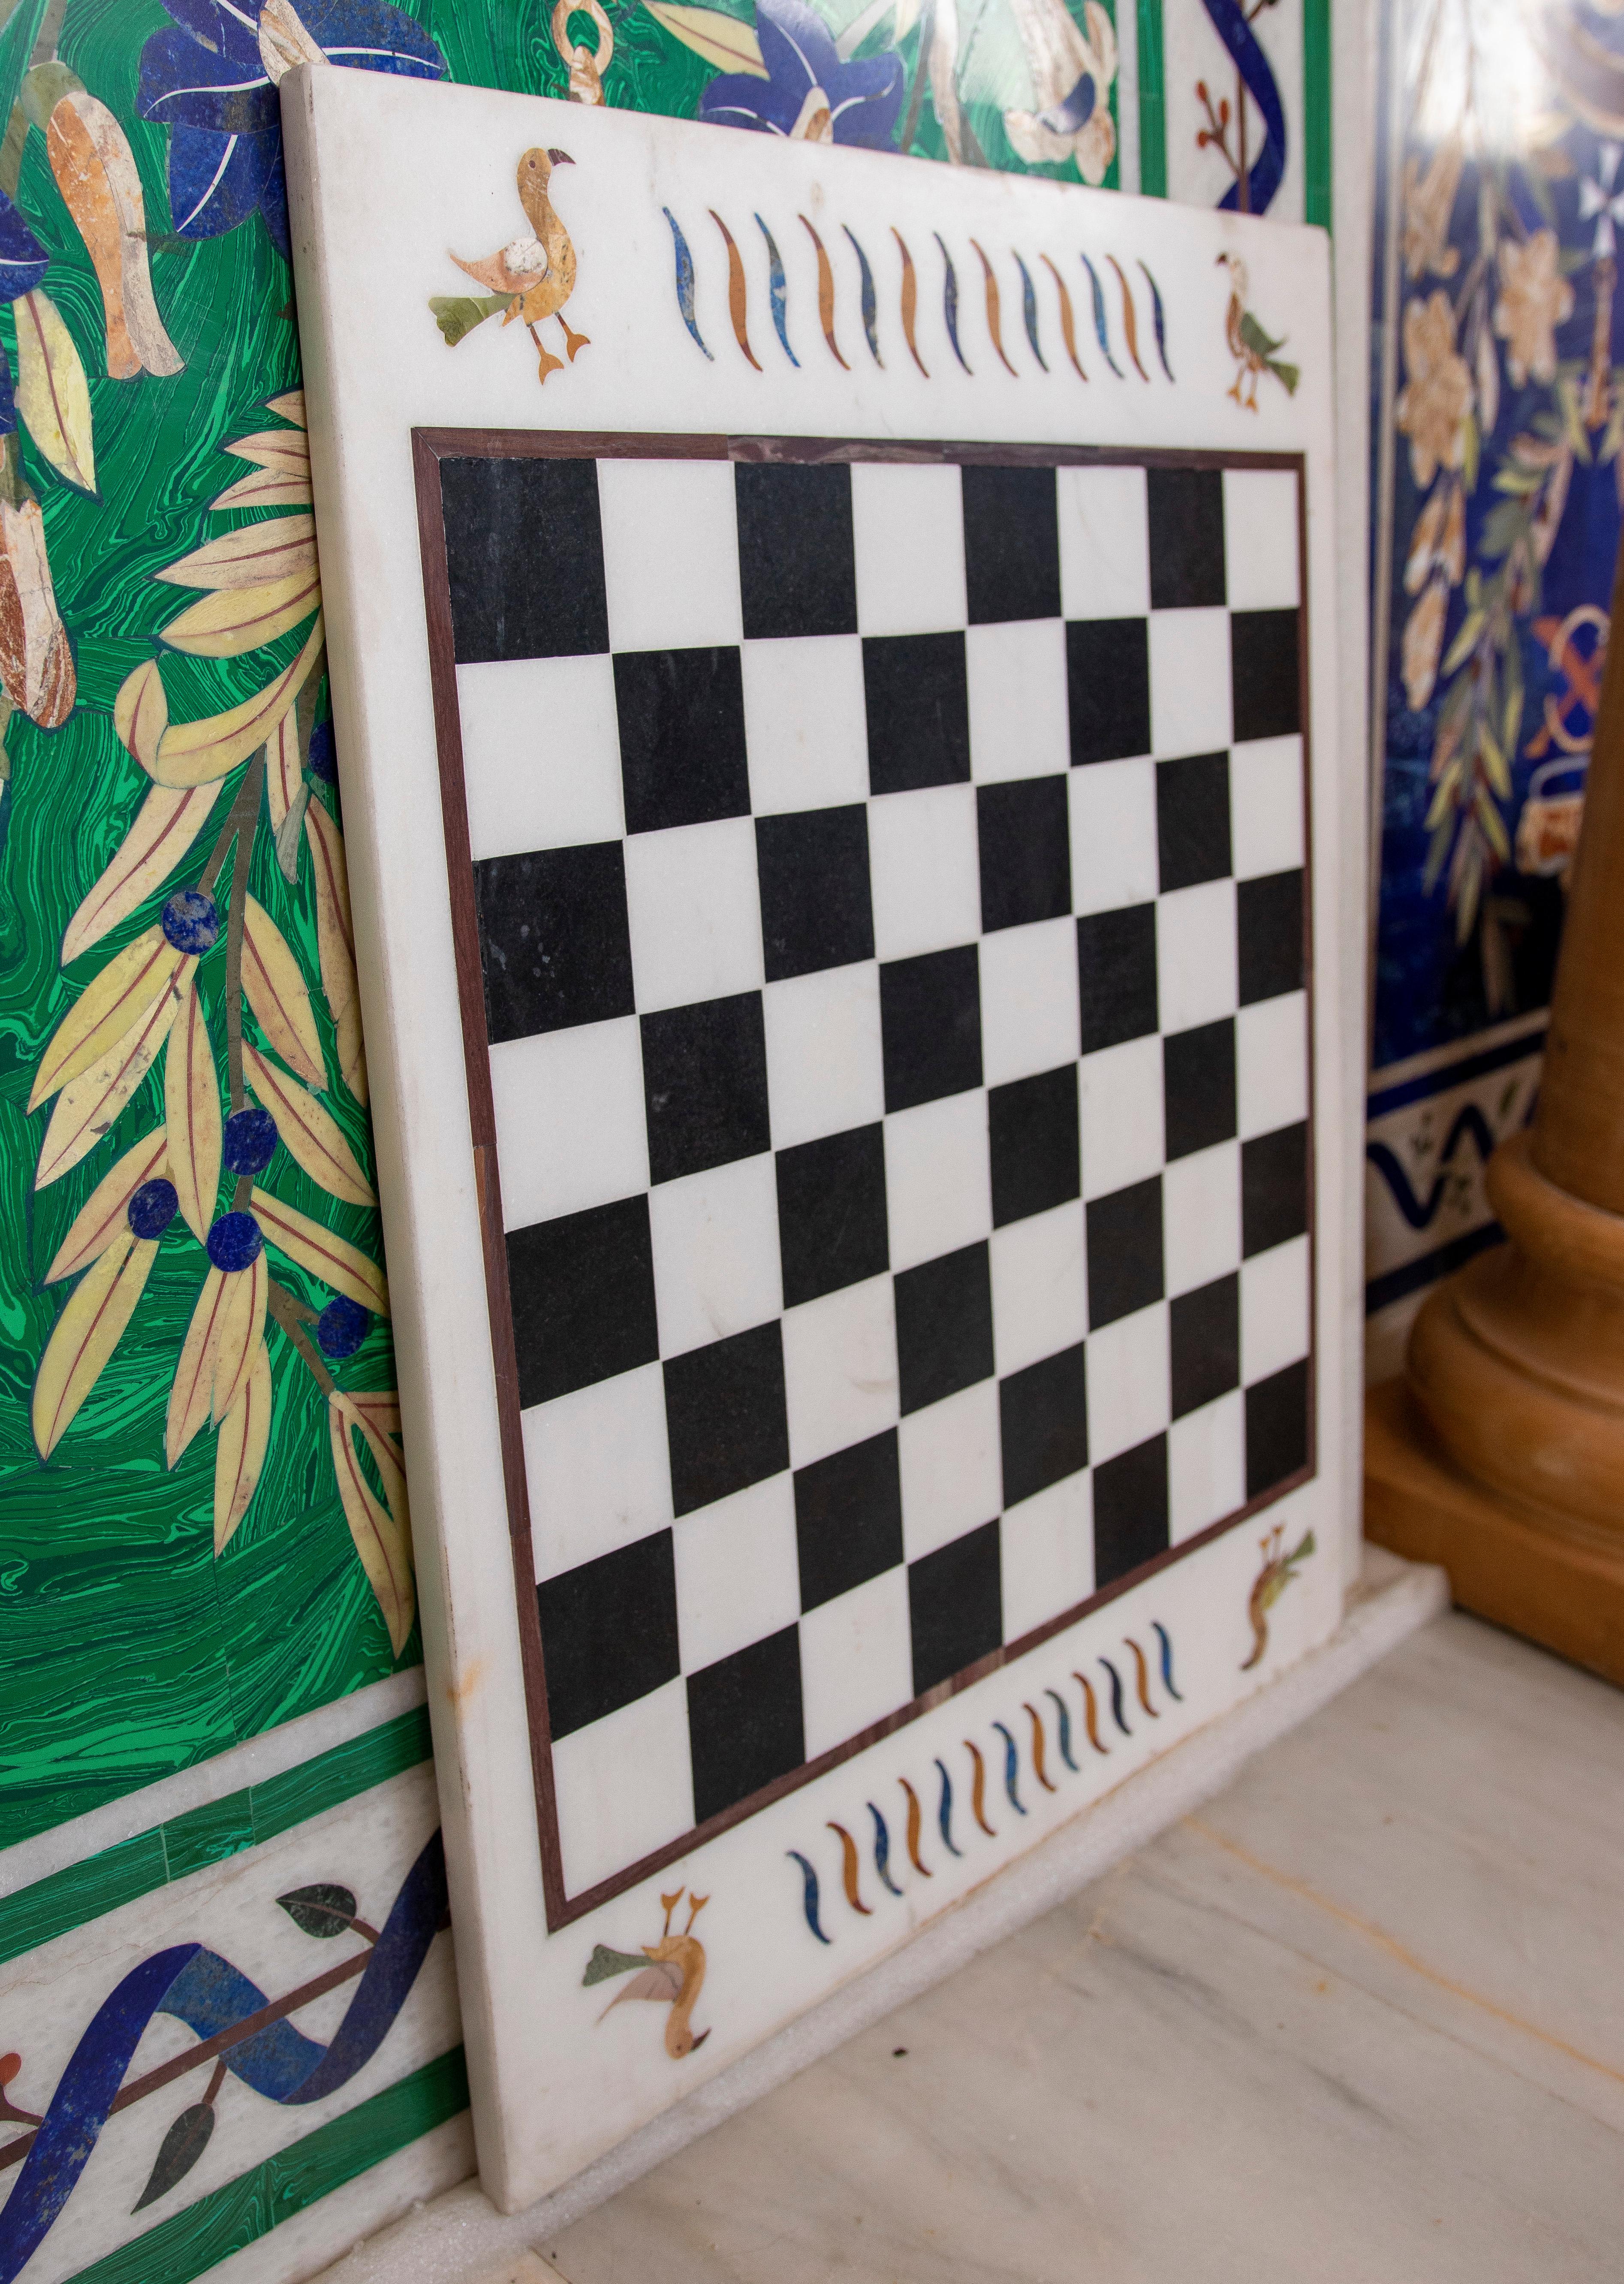 1990s Spanish Pietra Dura inlay mosaic square table top with chess board, handmade with semiprecious gemstones including blue lapis lazuli and green malachite.
      